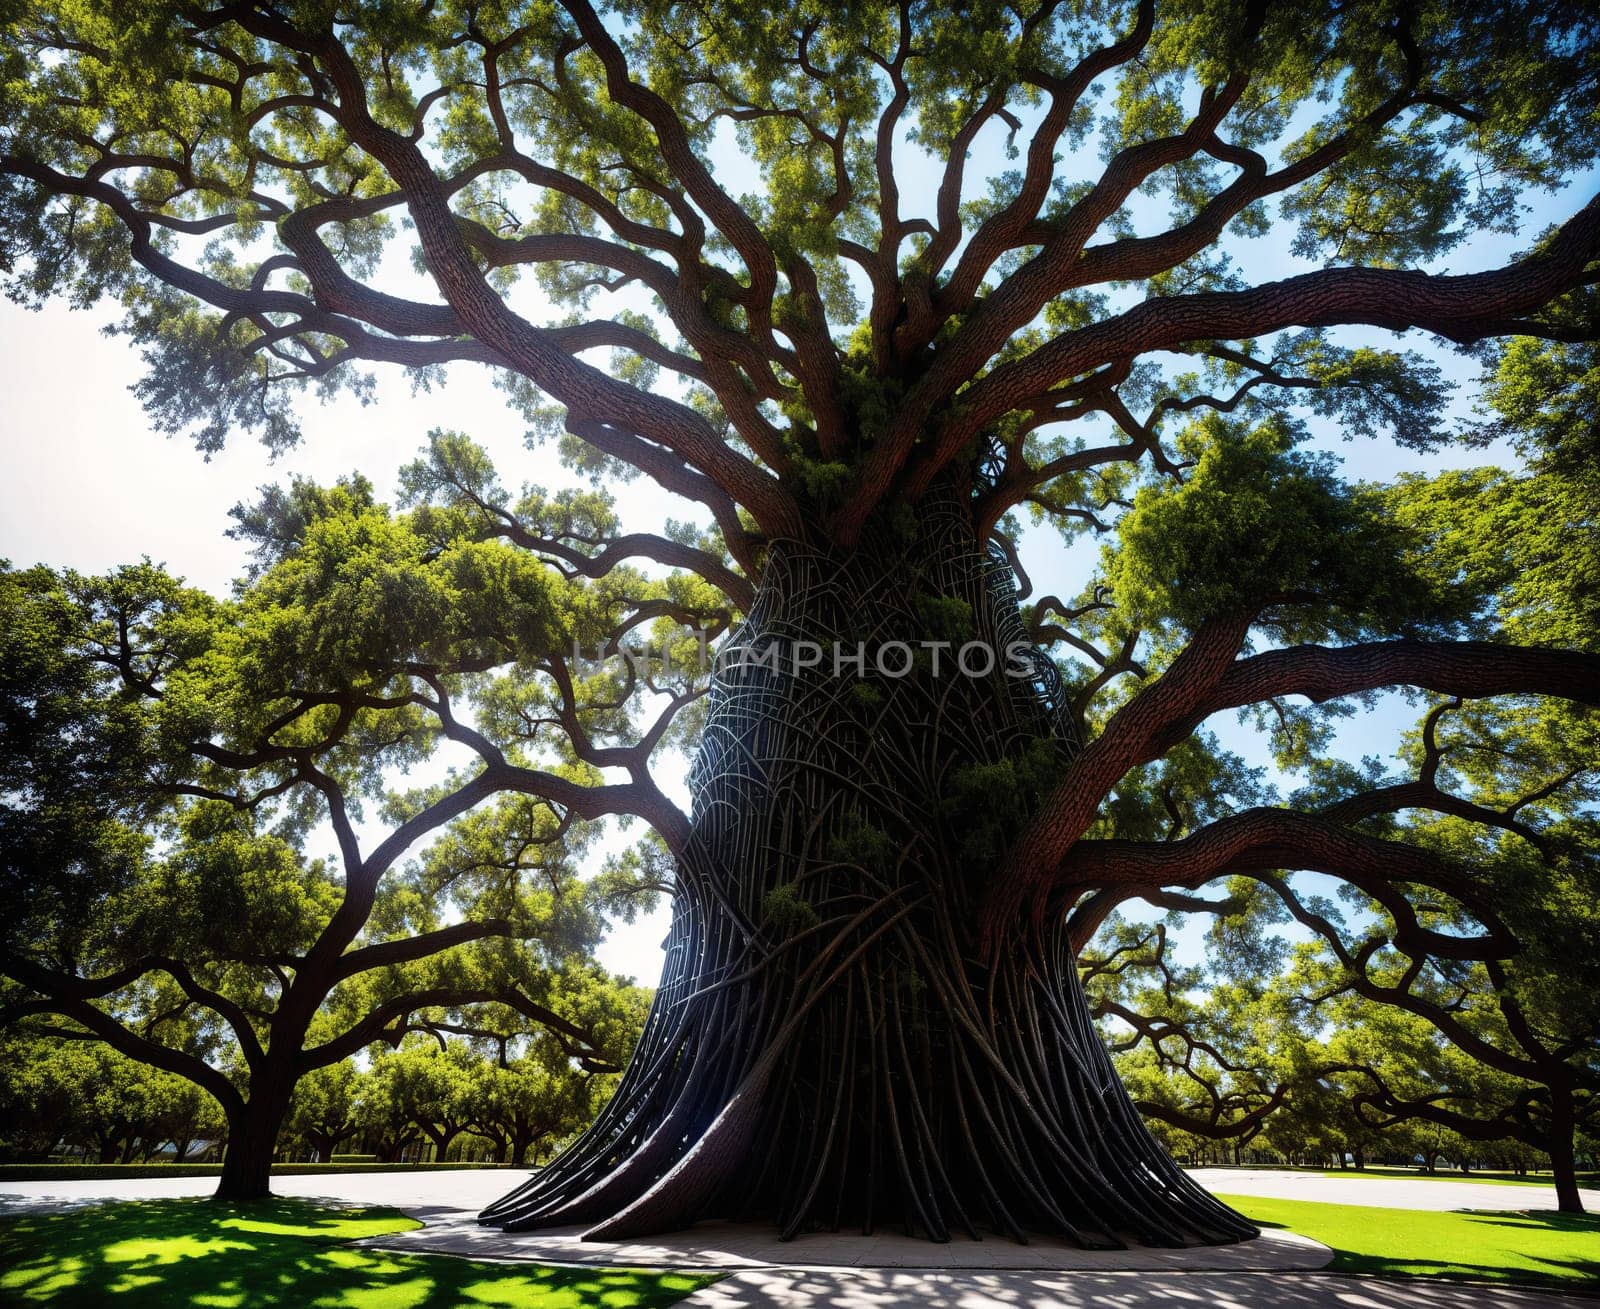 A large, old tree with a gnarled trunk and branches that stretch up towards the sky. by creart